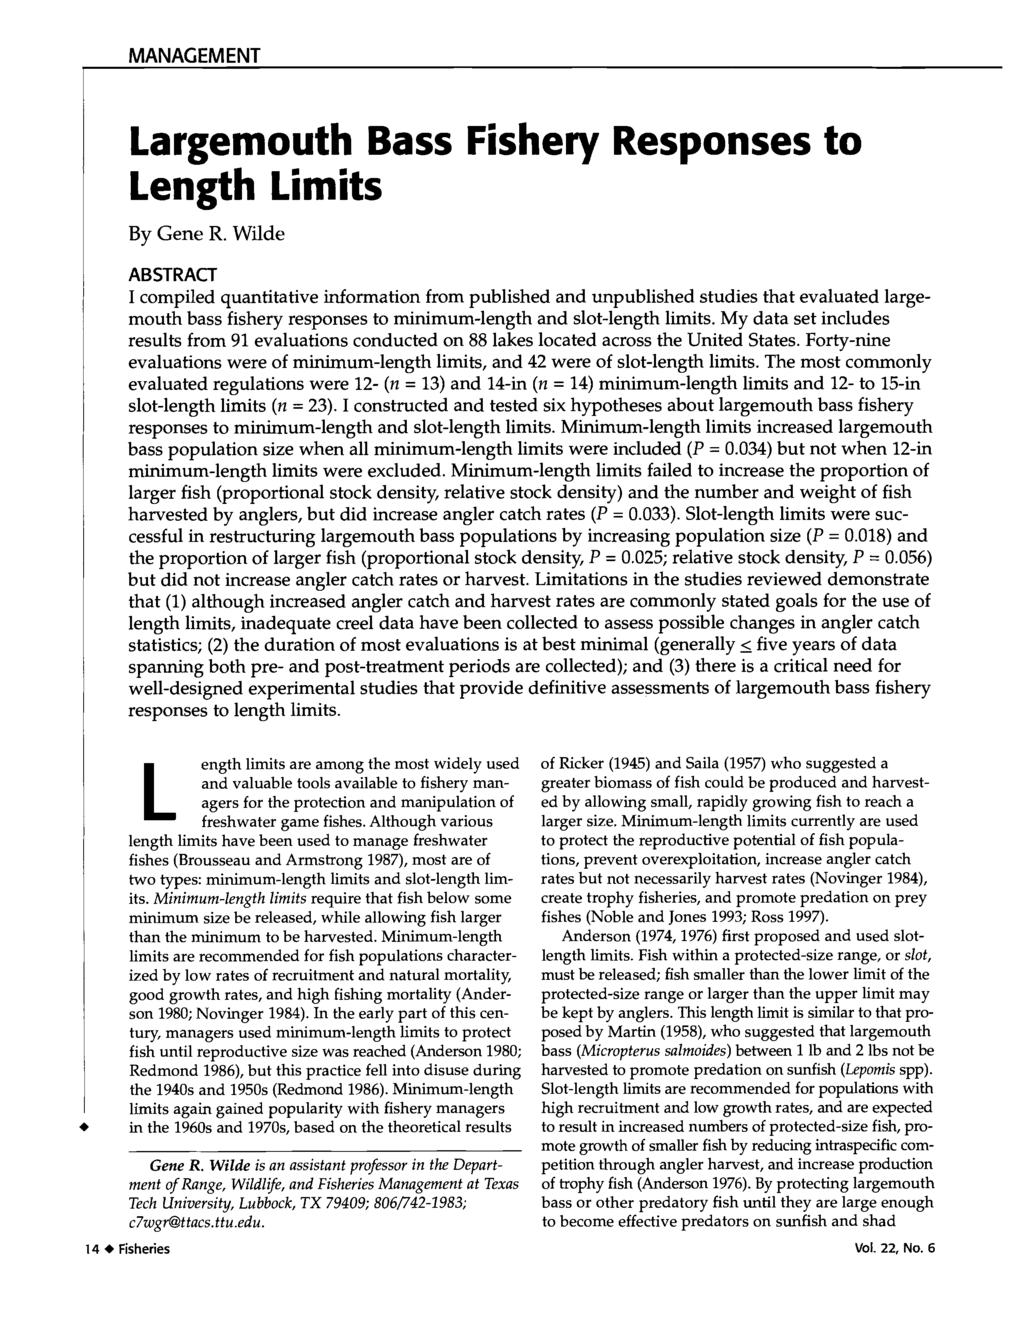 Largemouth Bass Fishery Responses to Length Limits By Gene R.